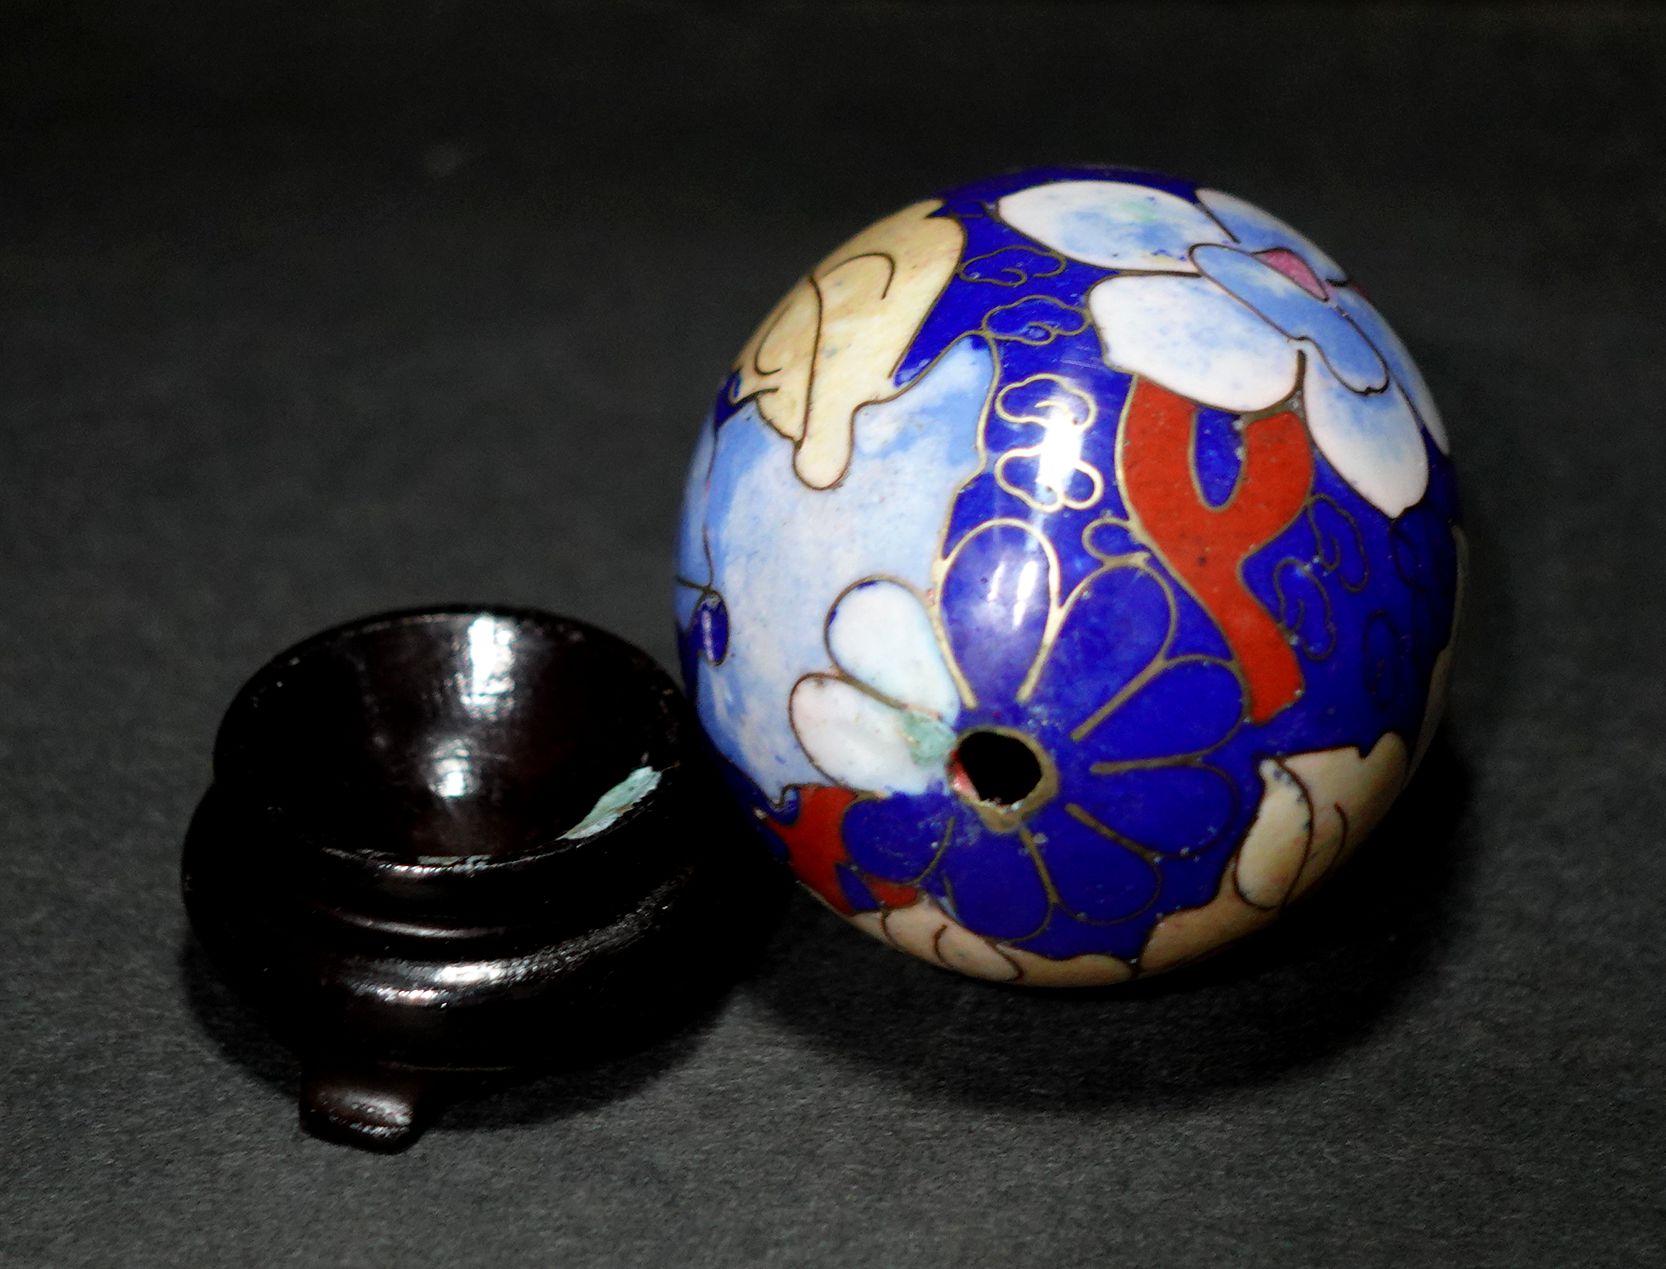 Chinese Export Chinese Cloisonné Enamel Egg 